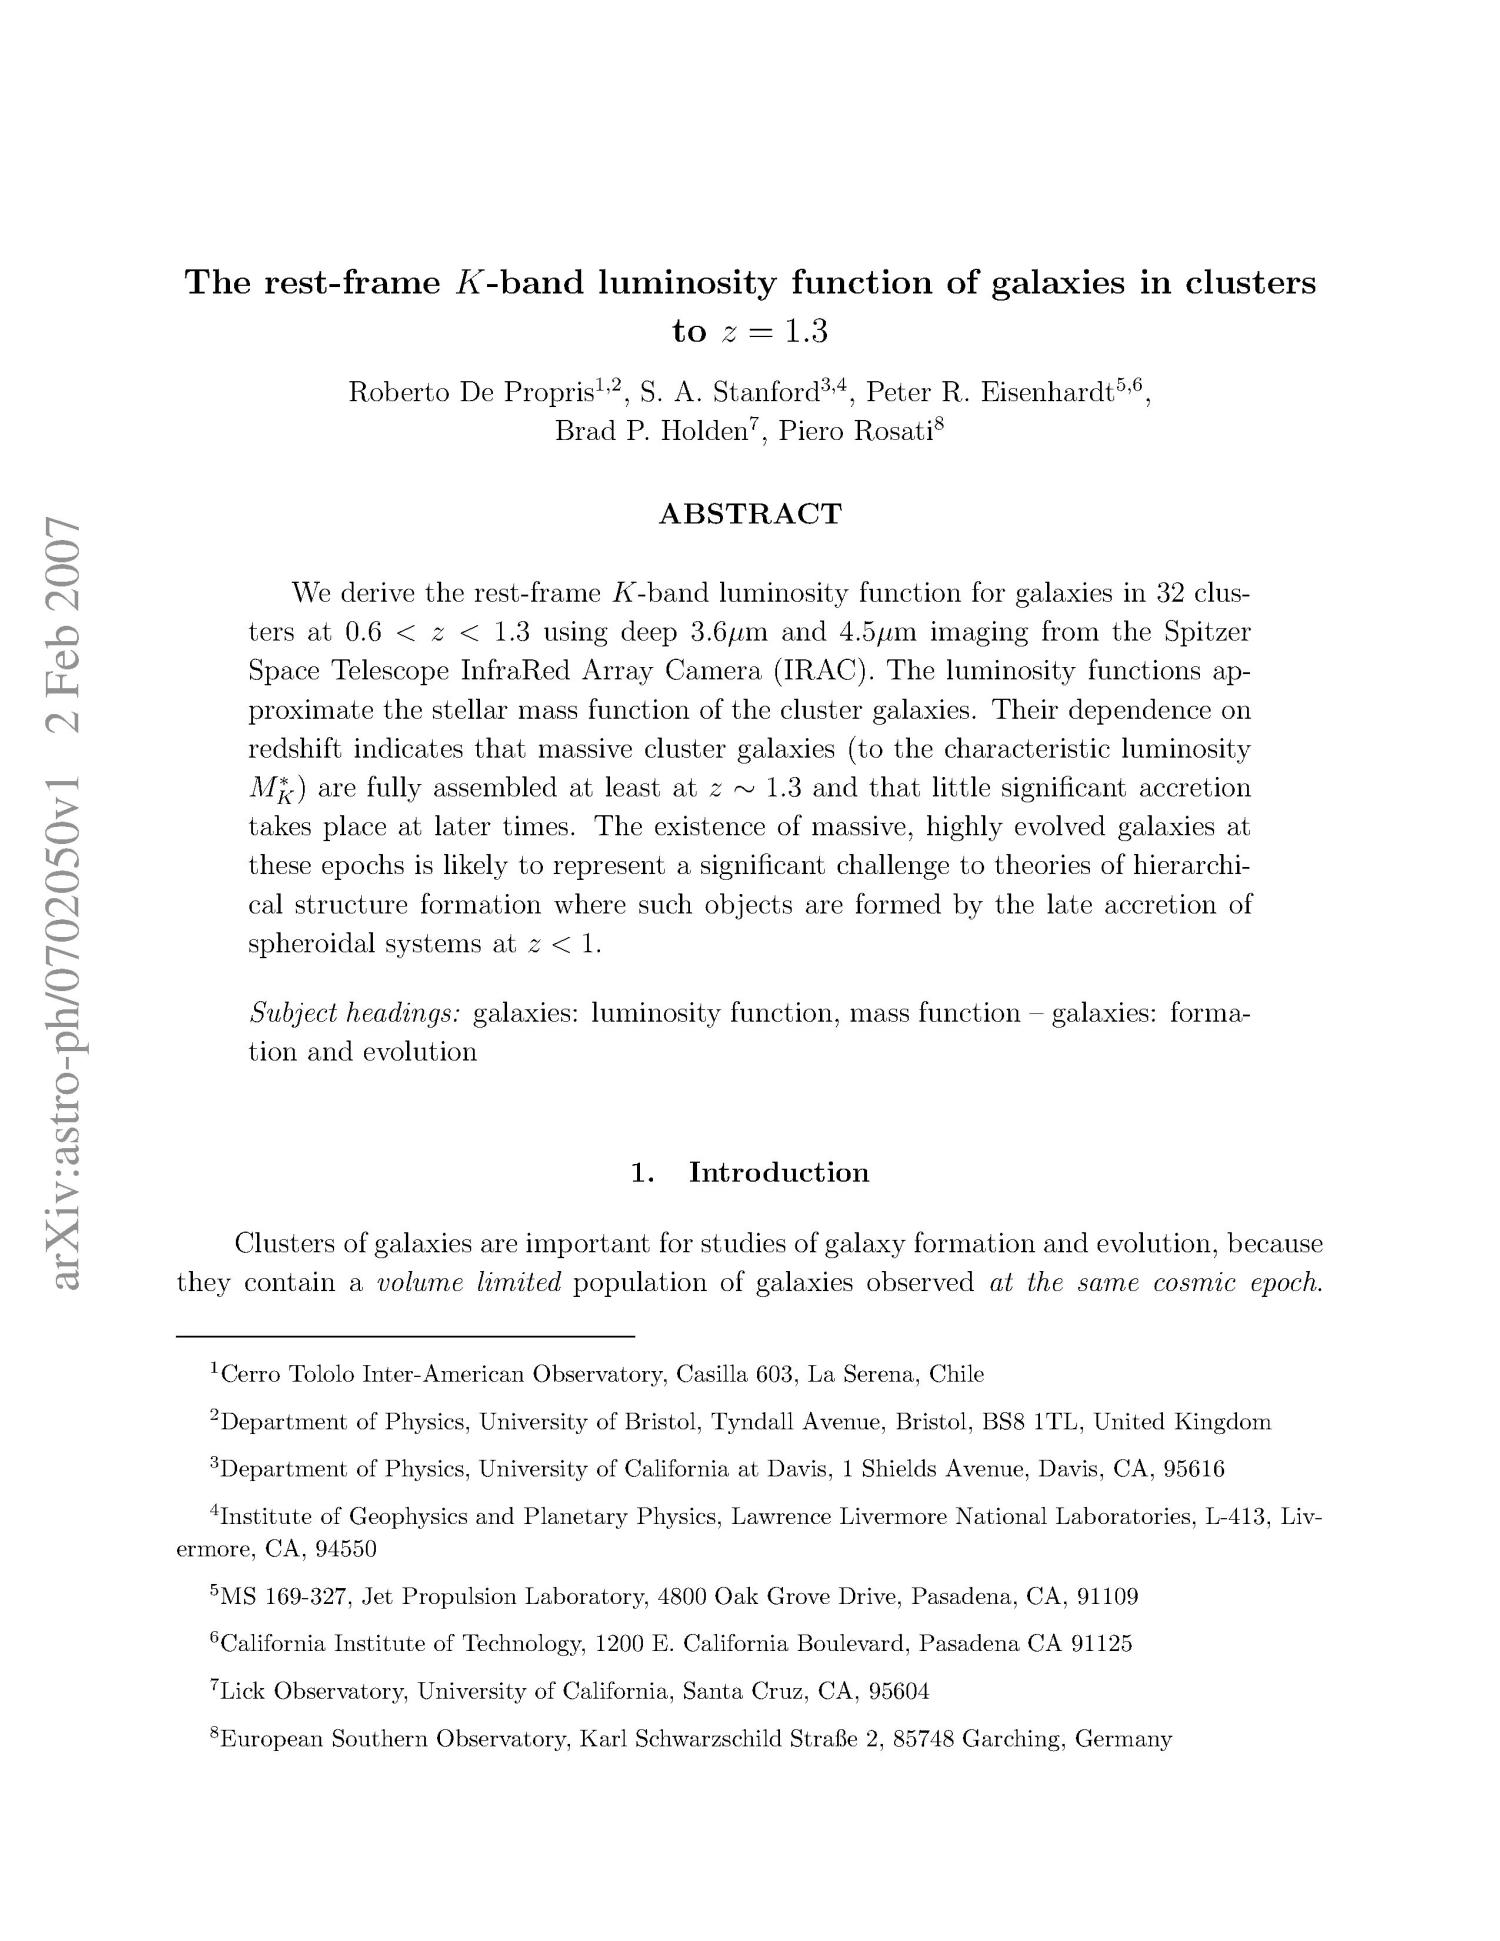 The rest-frame K-band luminosity function of galaxies in clusters to z = 1.3
                                                
                                                    [Sequence #]: 3 of 20
                                                